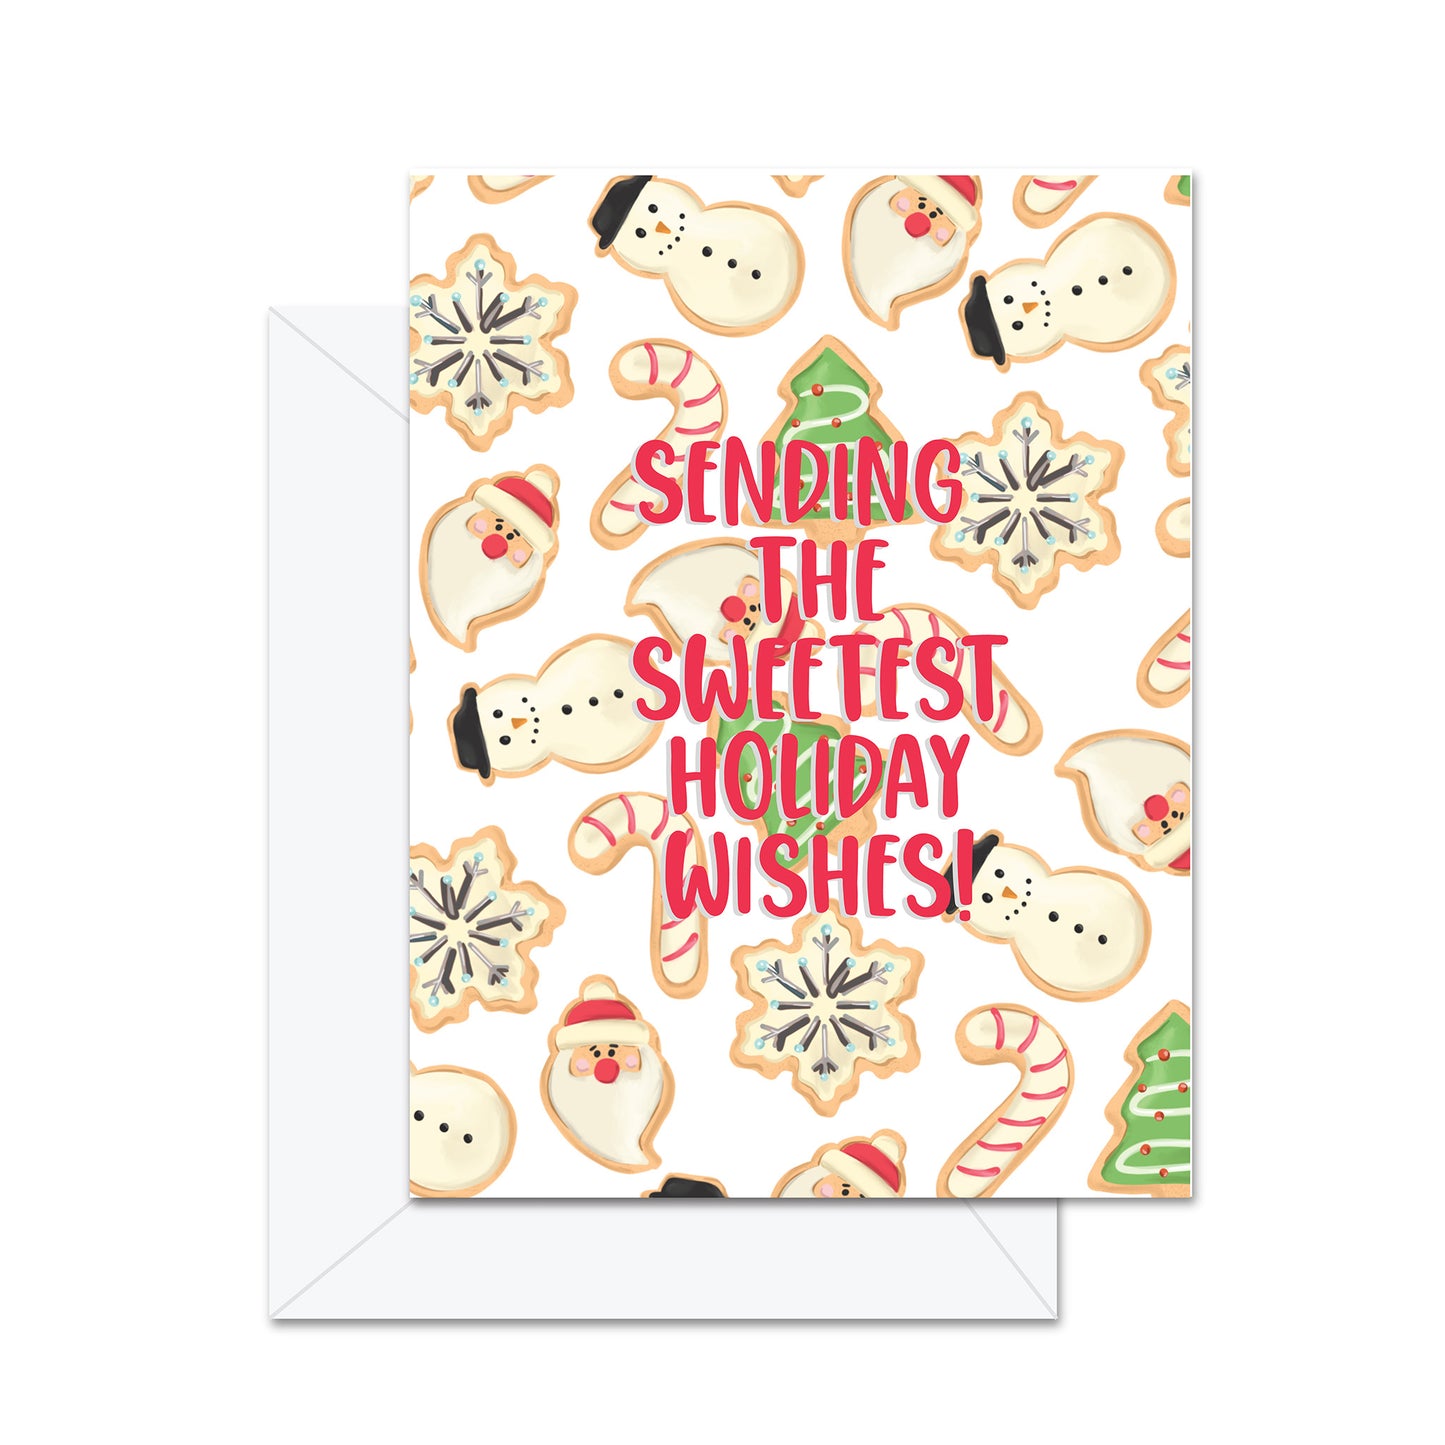 Sending The Sweetest Holiday Wishes - Greeting Card